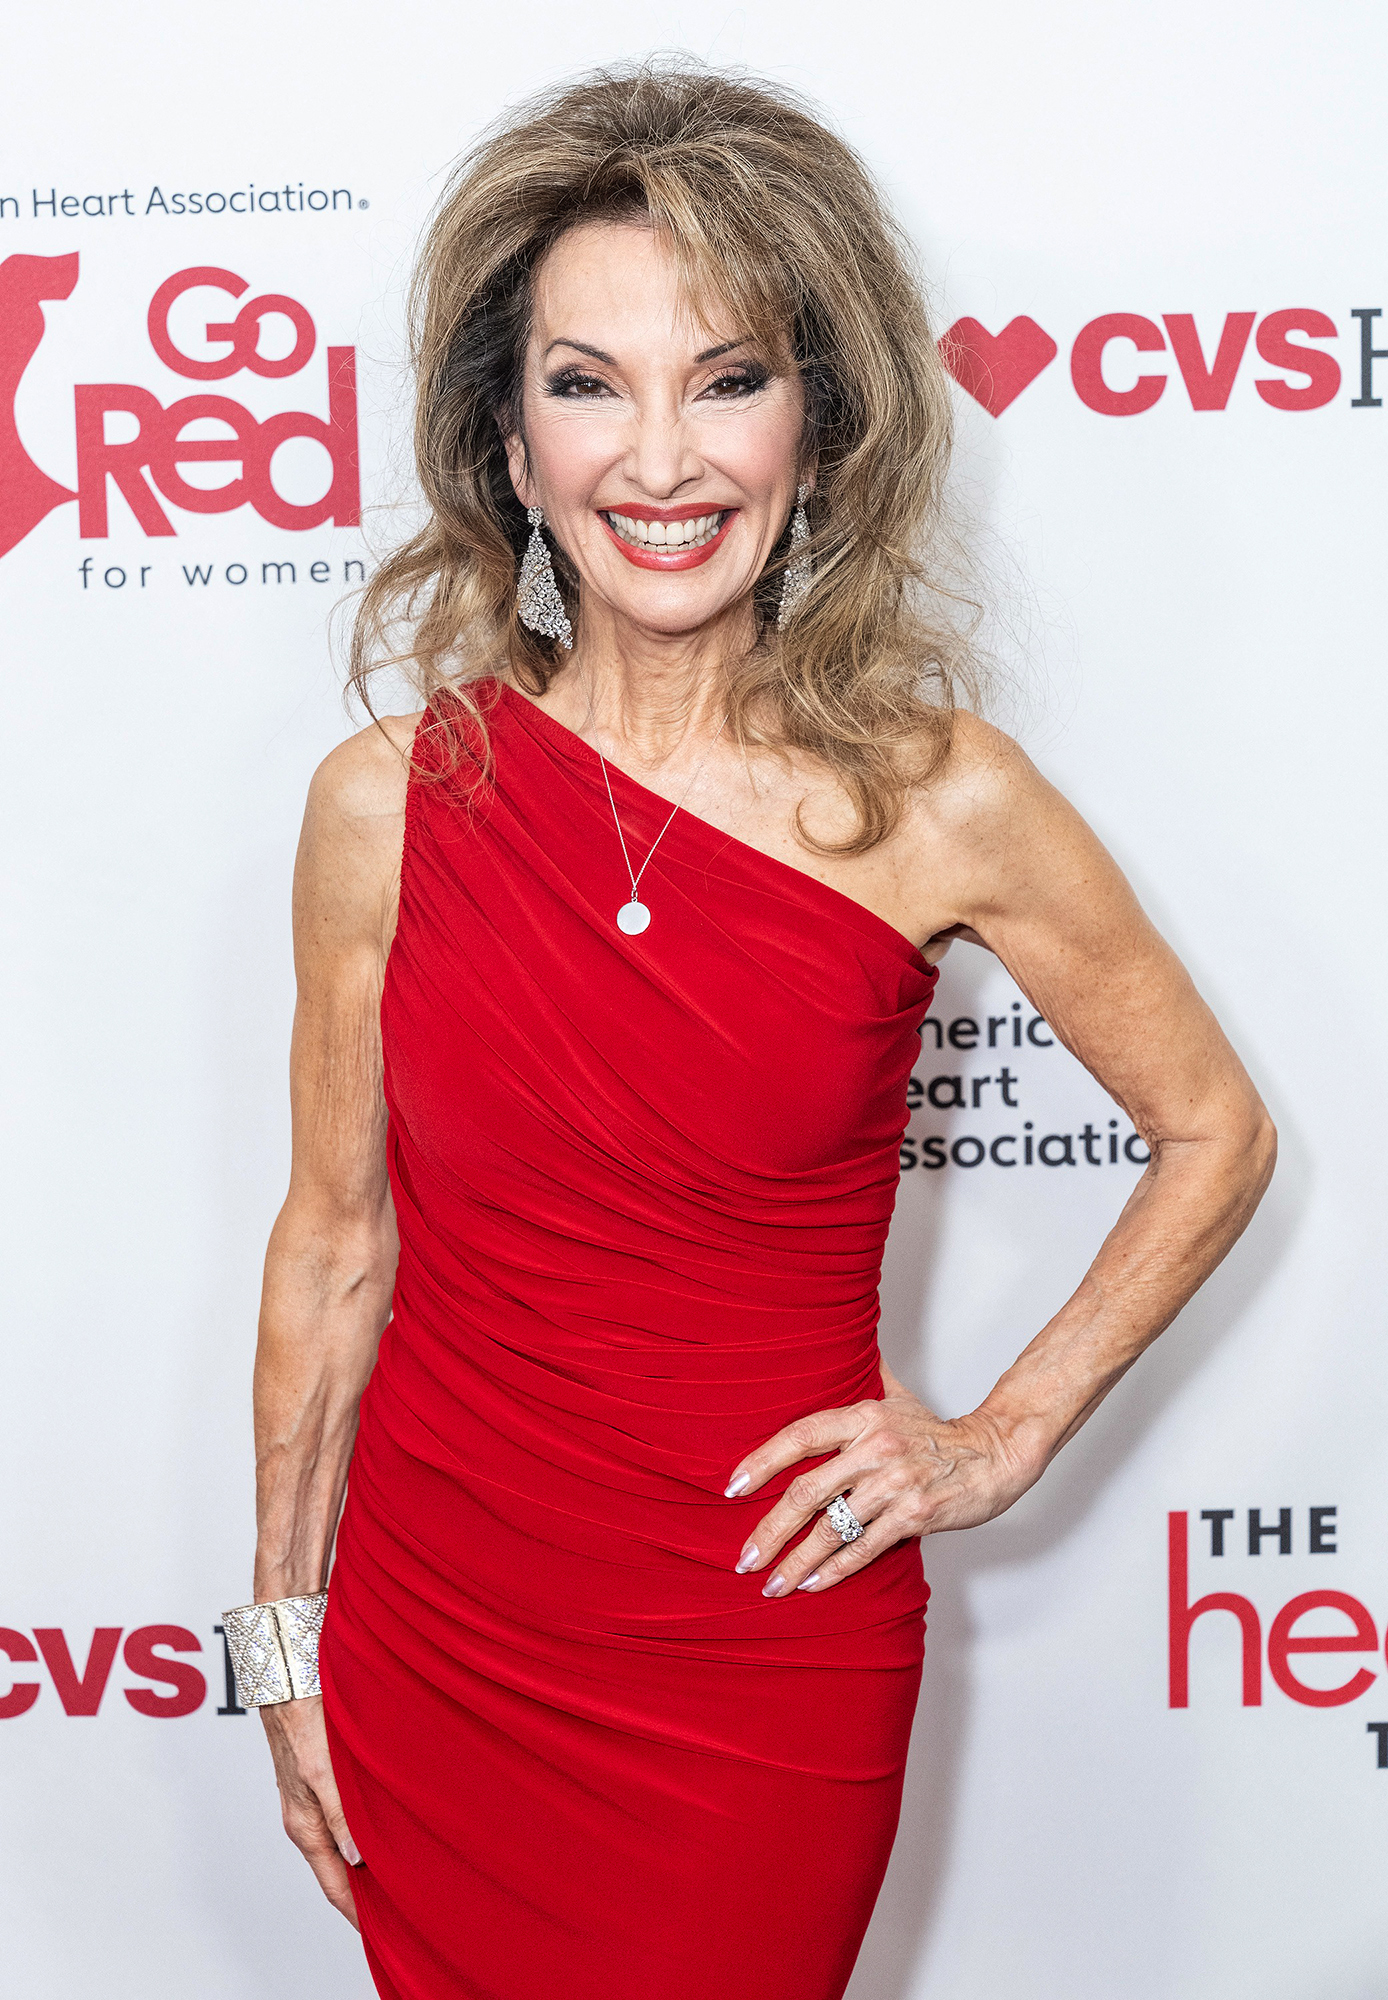 Susan Lucci Admits She Is 'Totally Addicted' to 'The Bachelor'